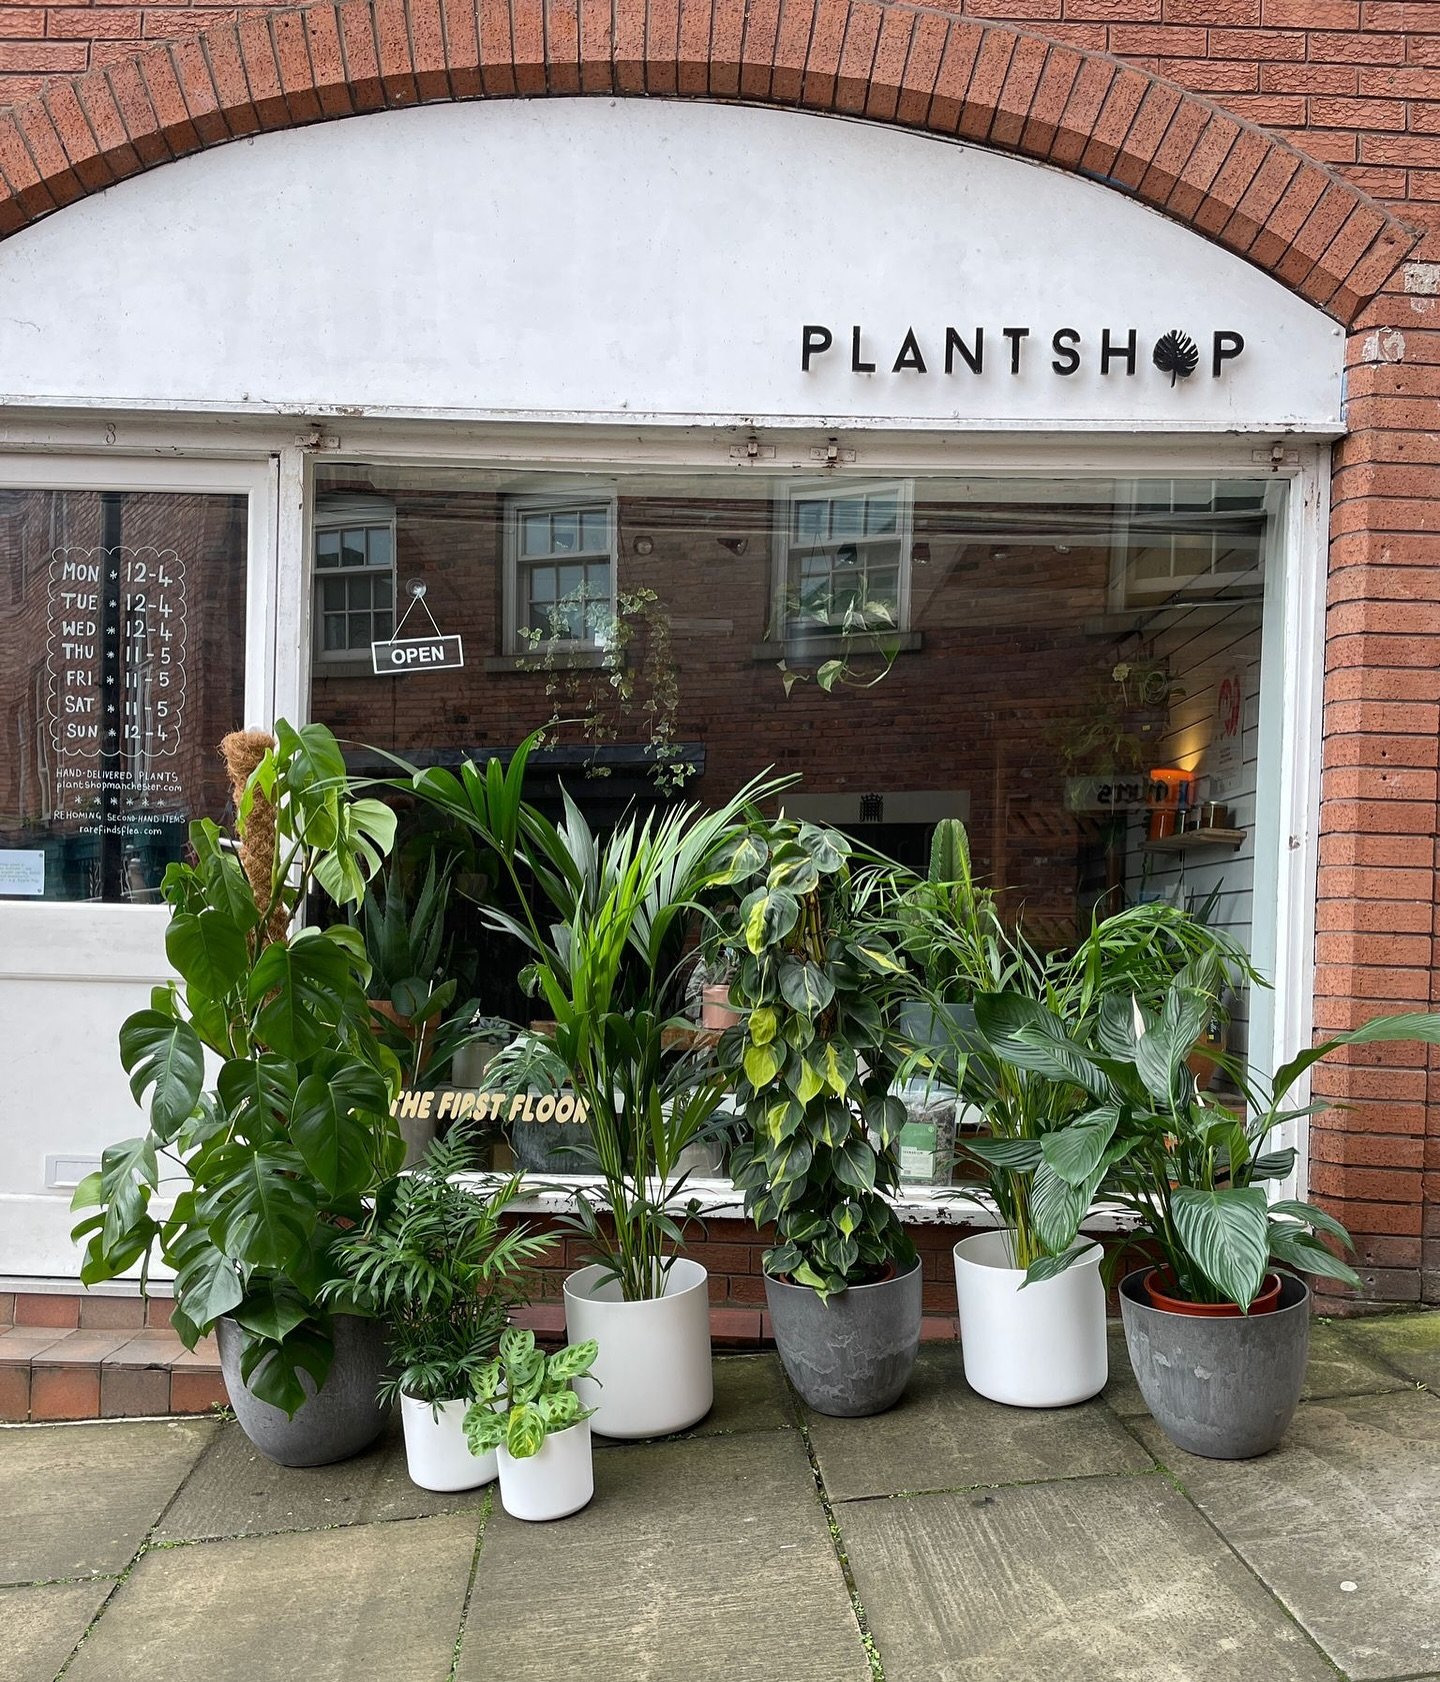 Hosting an event that needs some greenery? Need a specific plant for a photoshoot? 🪴

You can hire out our statement plants for your event! As a small business, Plant Shop specialises in hiring out the statement houseplants we currently have in-stoc